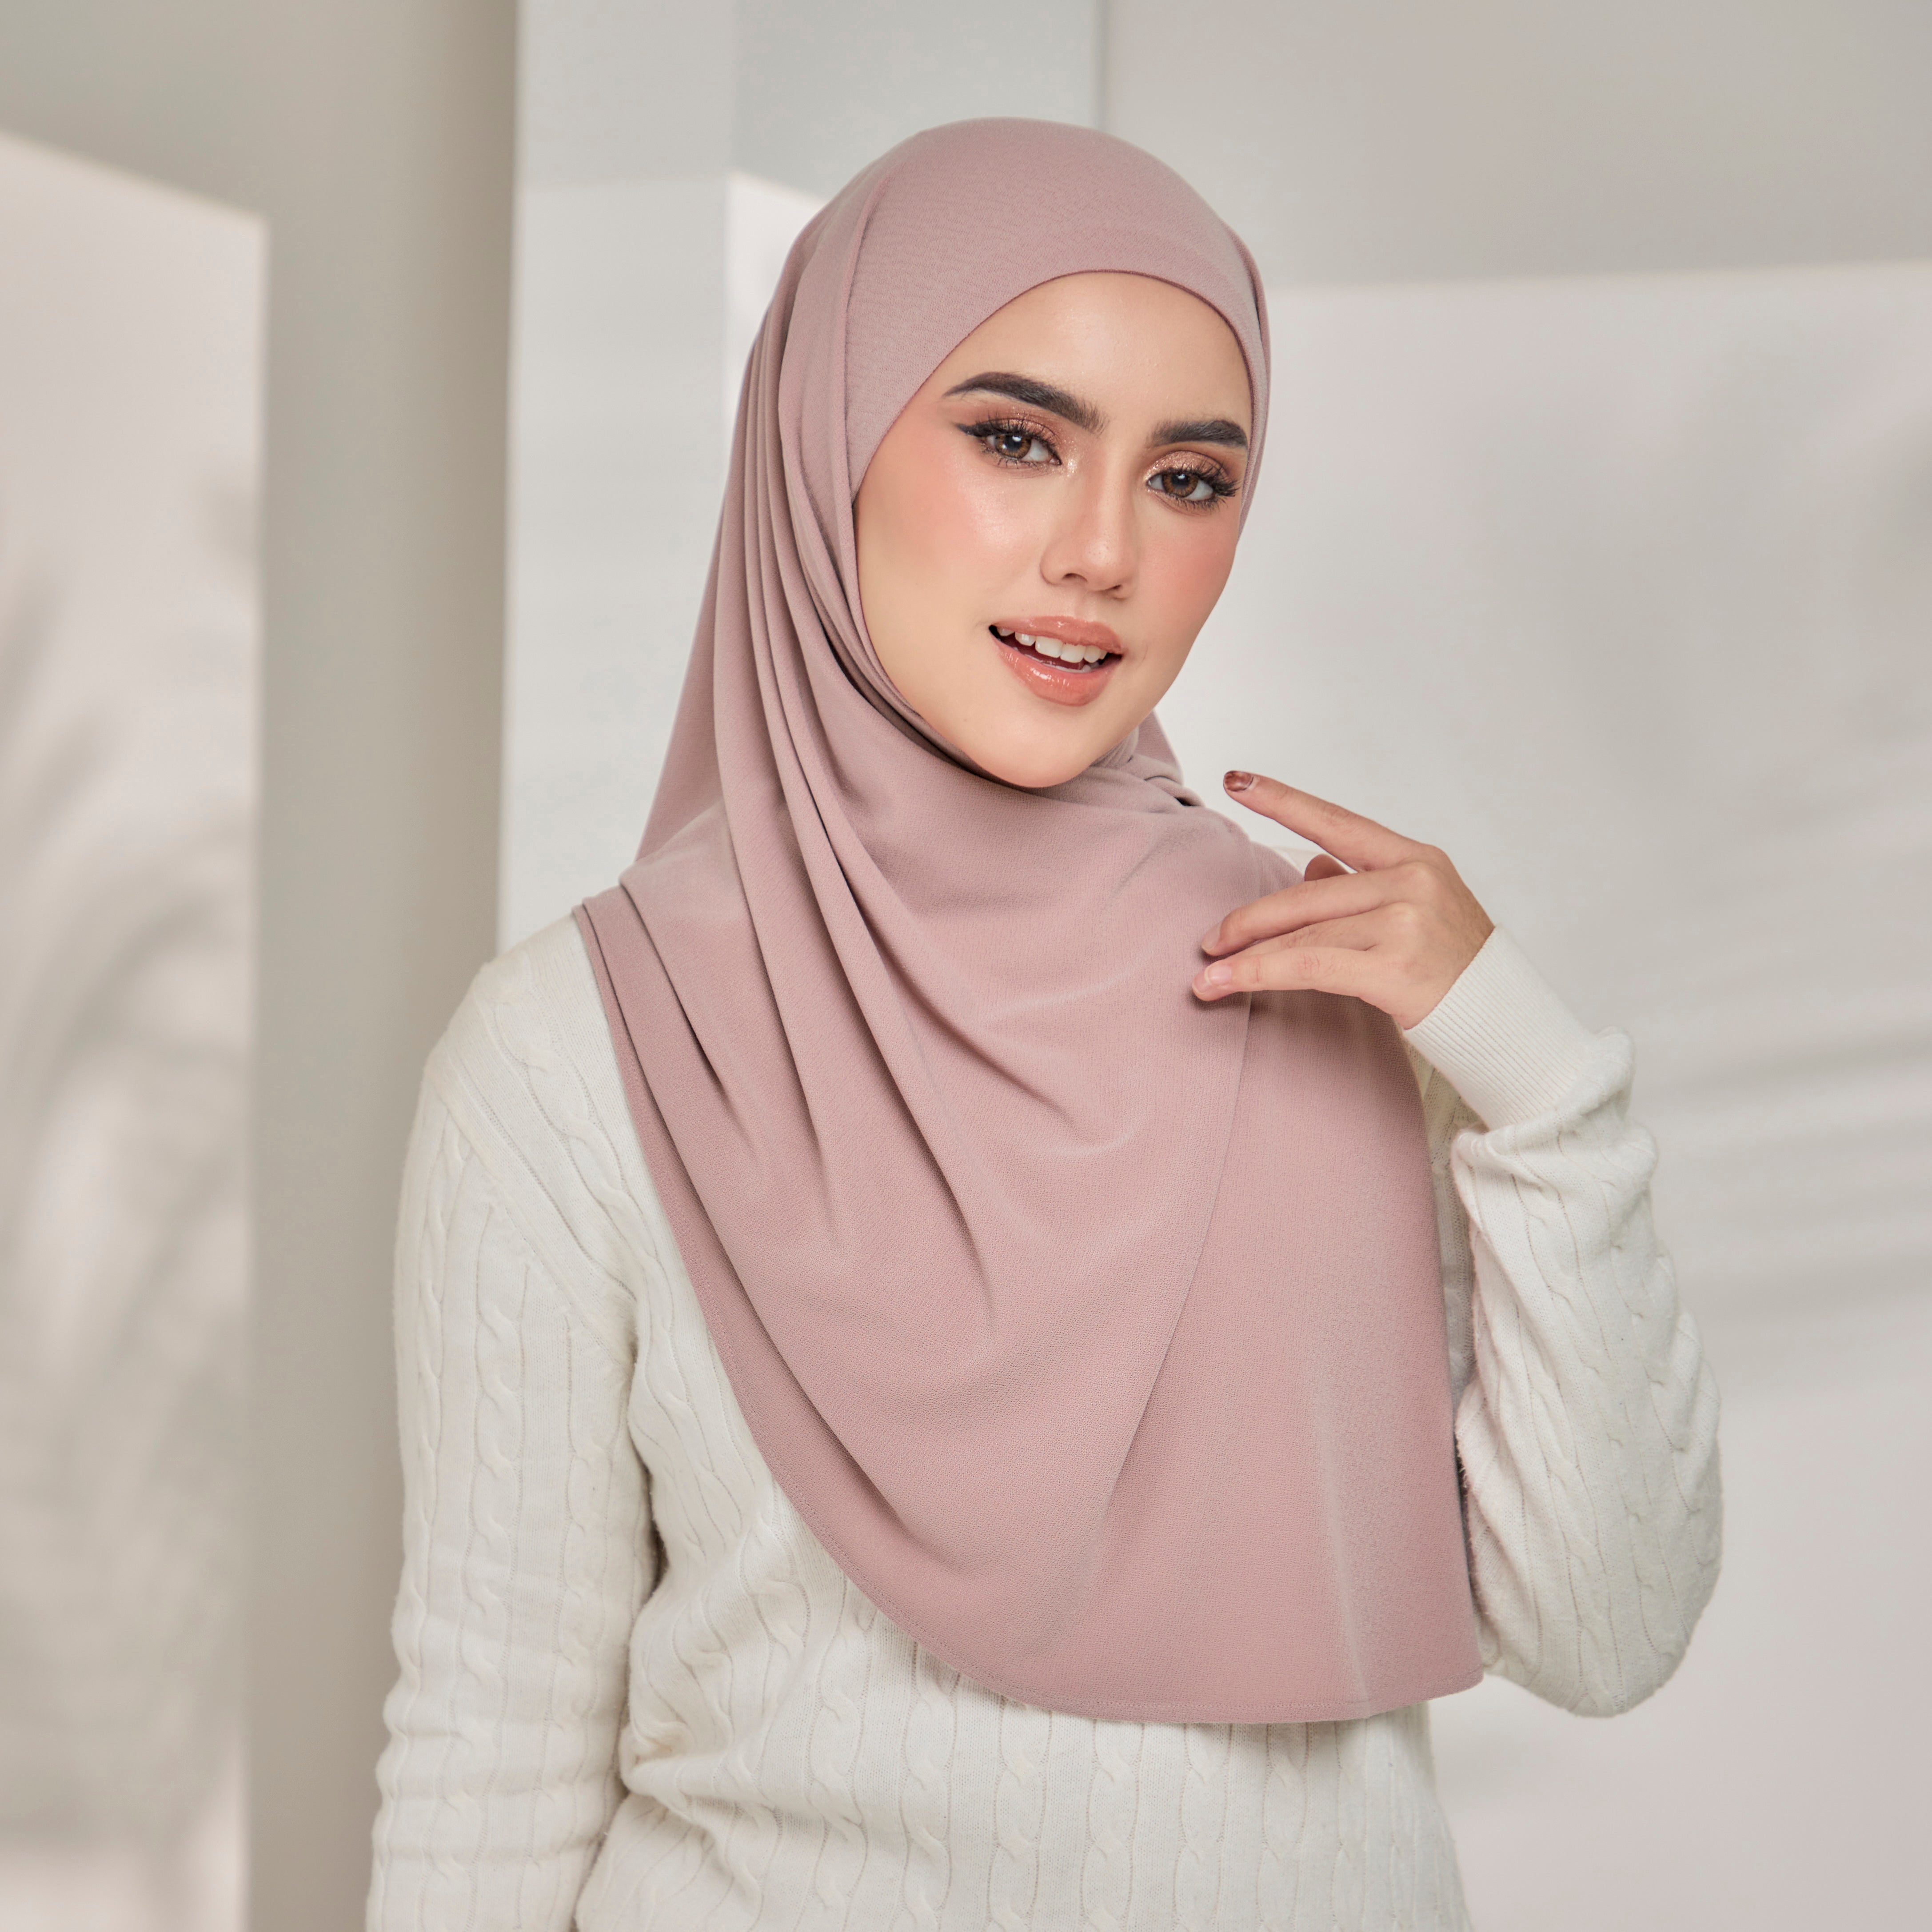 Lazy Tie-Back Instant Hijab in Ballerina (Dusty Pink)